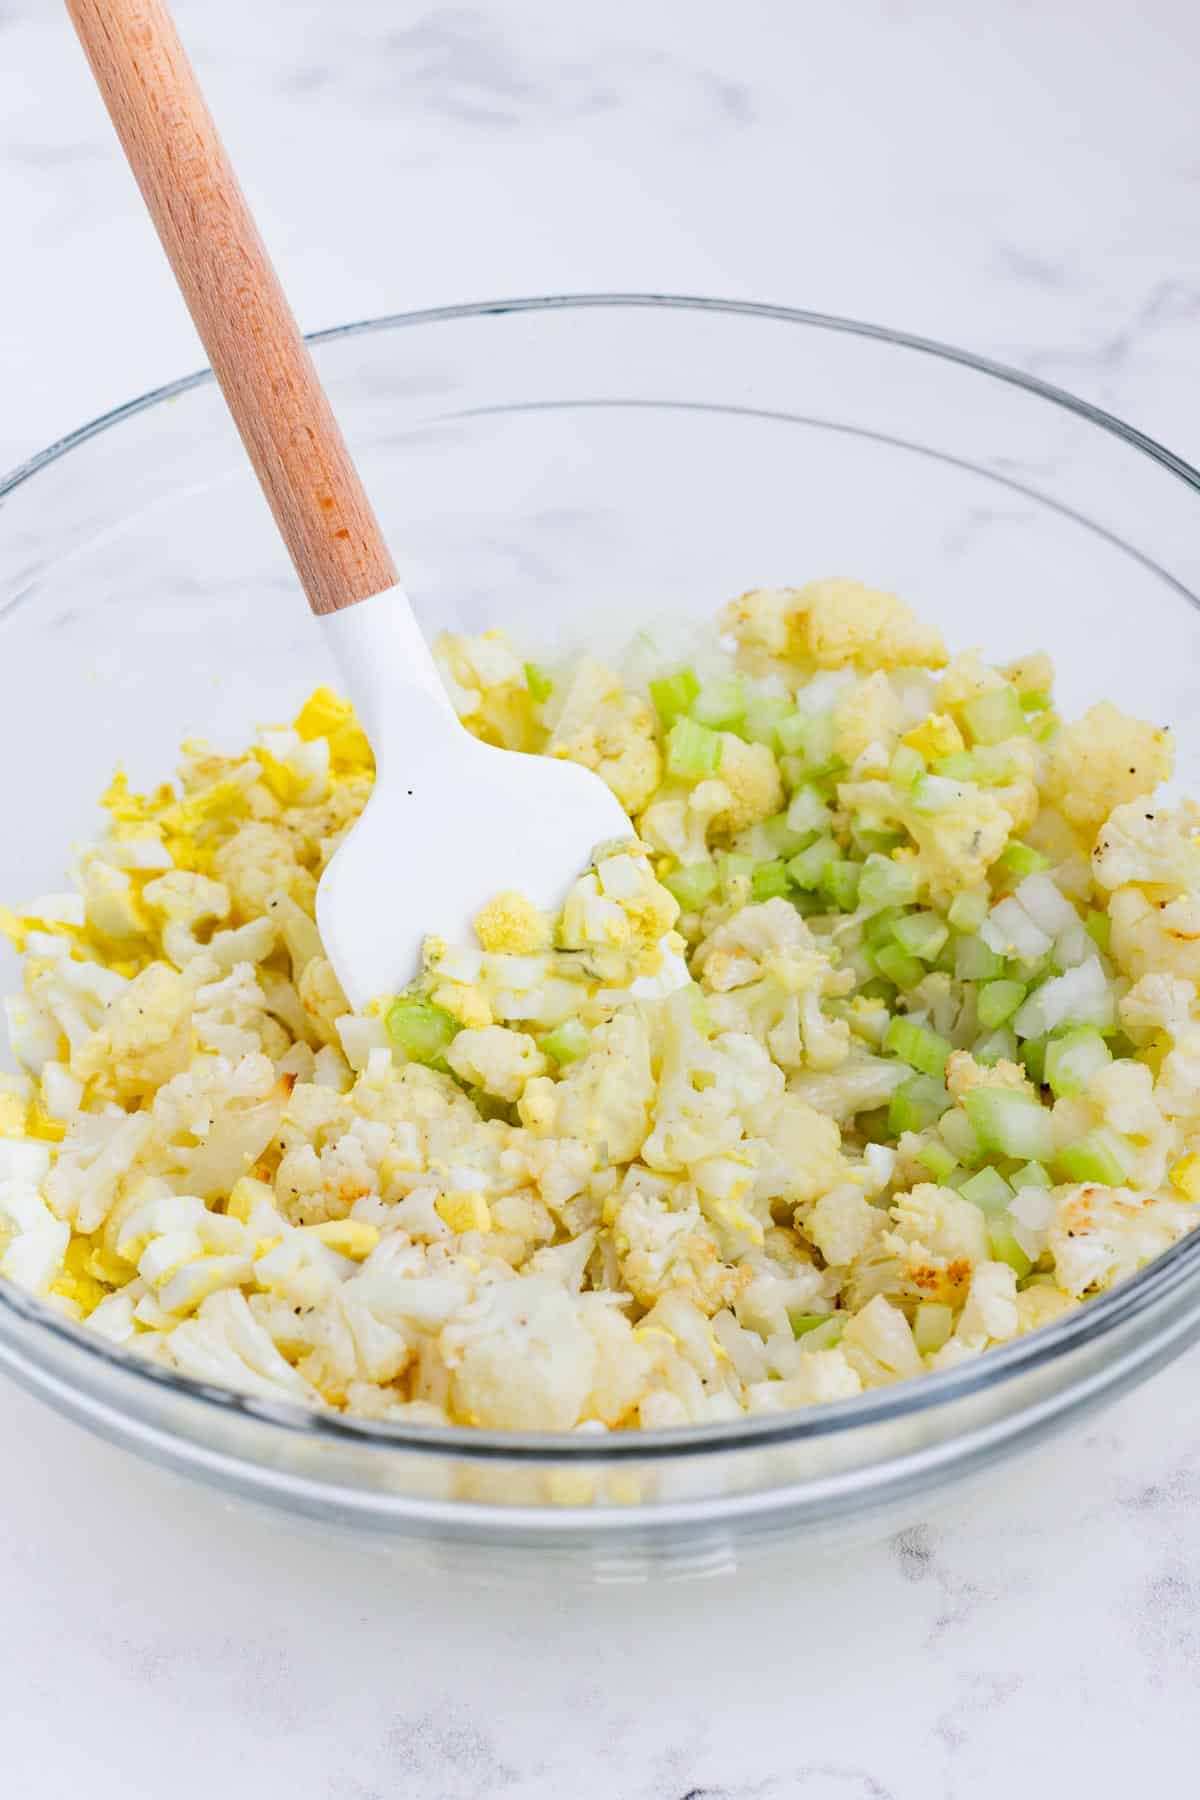 Roasted cauliflower, eggs, celery, onion, and sauce are mixed together.